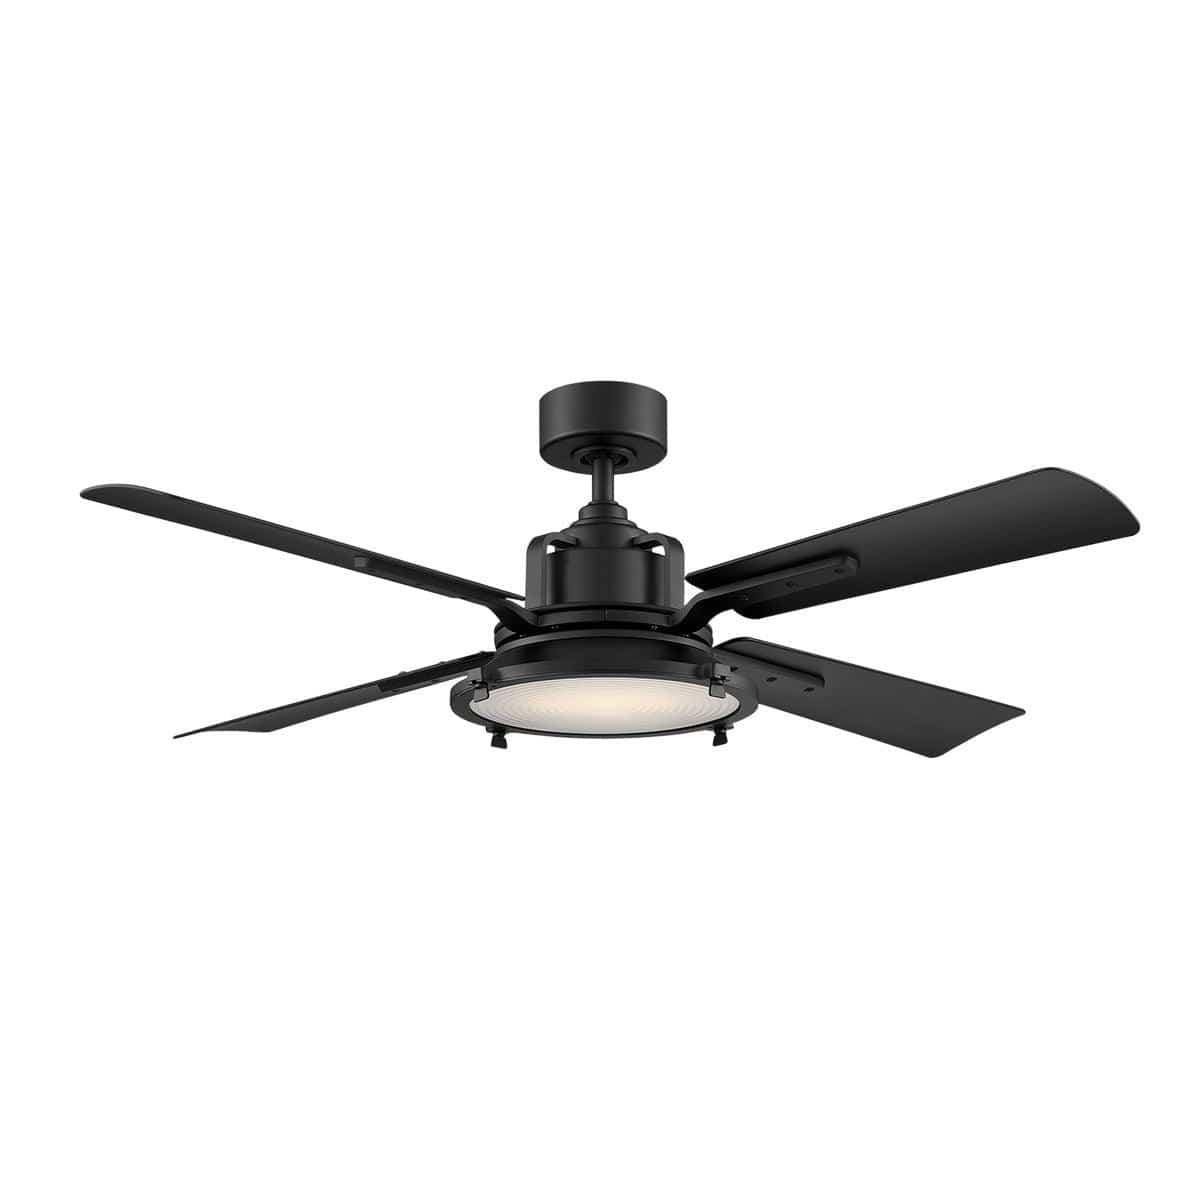 Modern Forms - Nautilus Ceiling Fan - FR-W1818-56L-MB | Montreal Lighting & Hardware